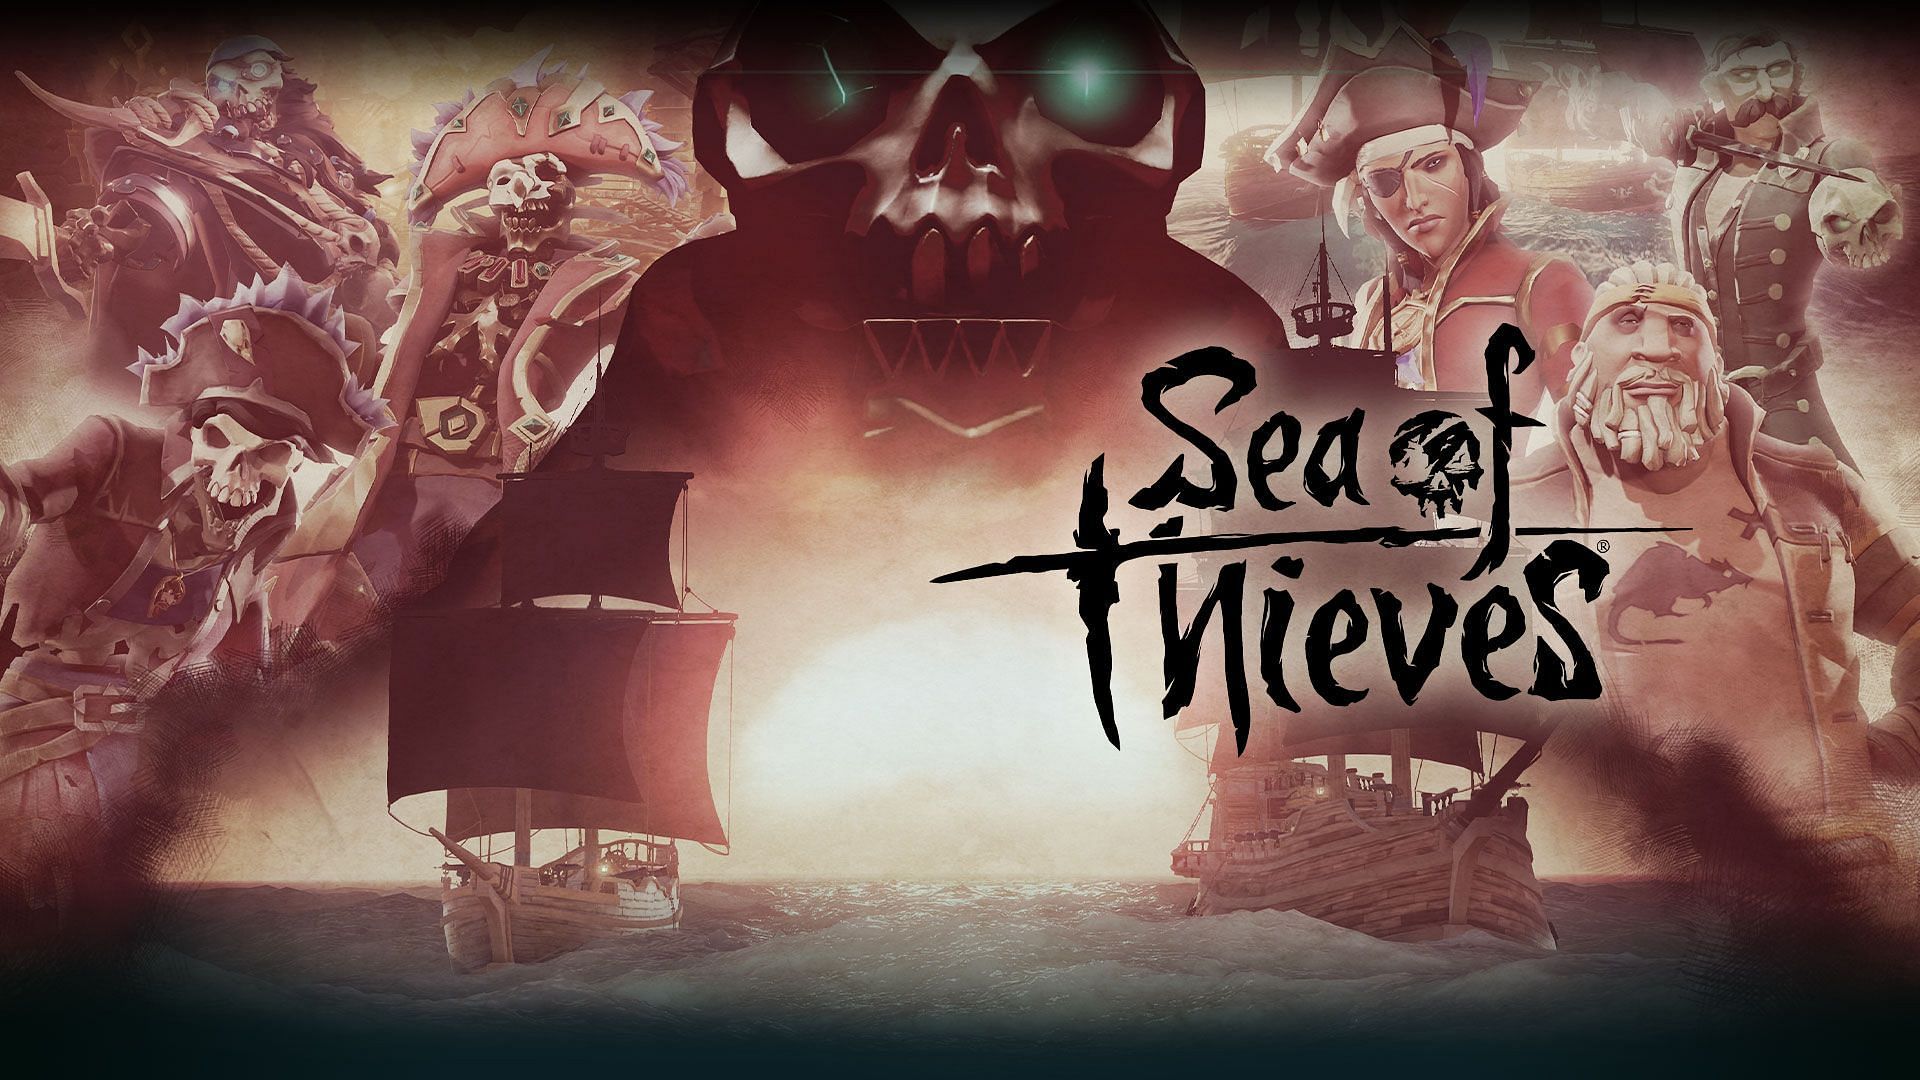 Sea of Thieves is rich in lore and has many myths and legends.